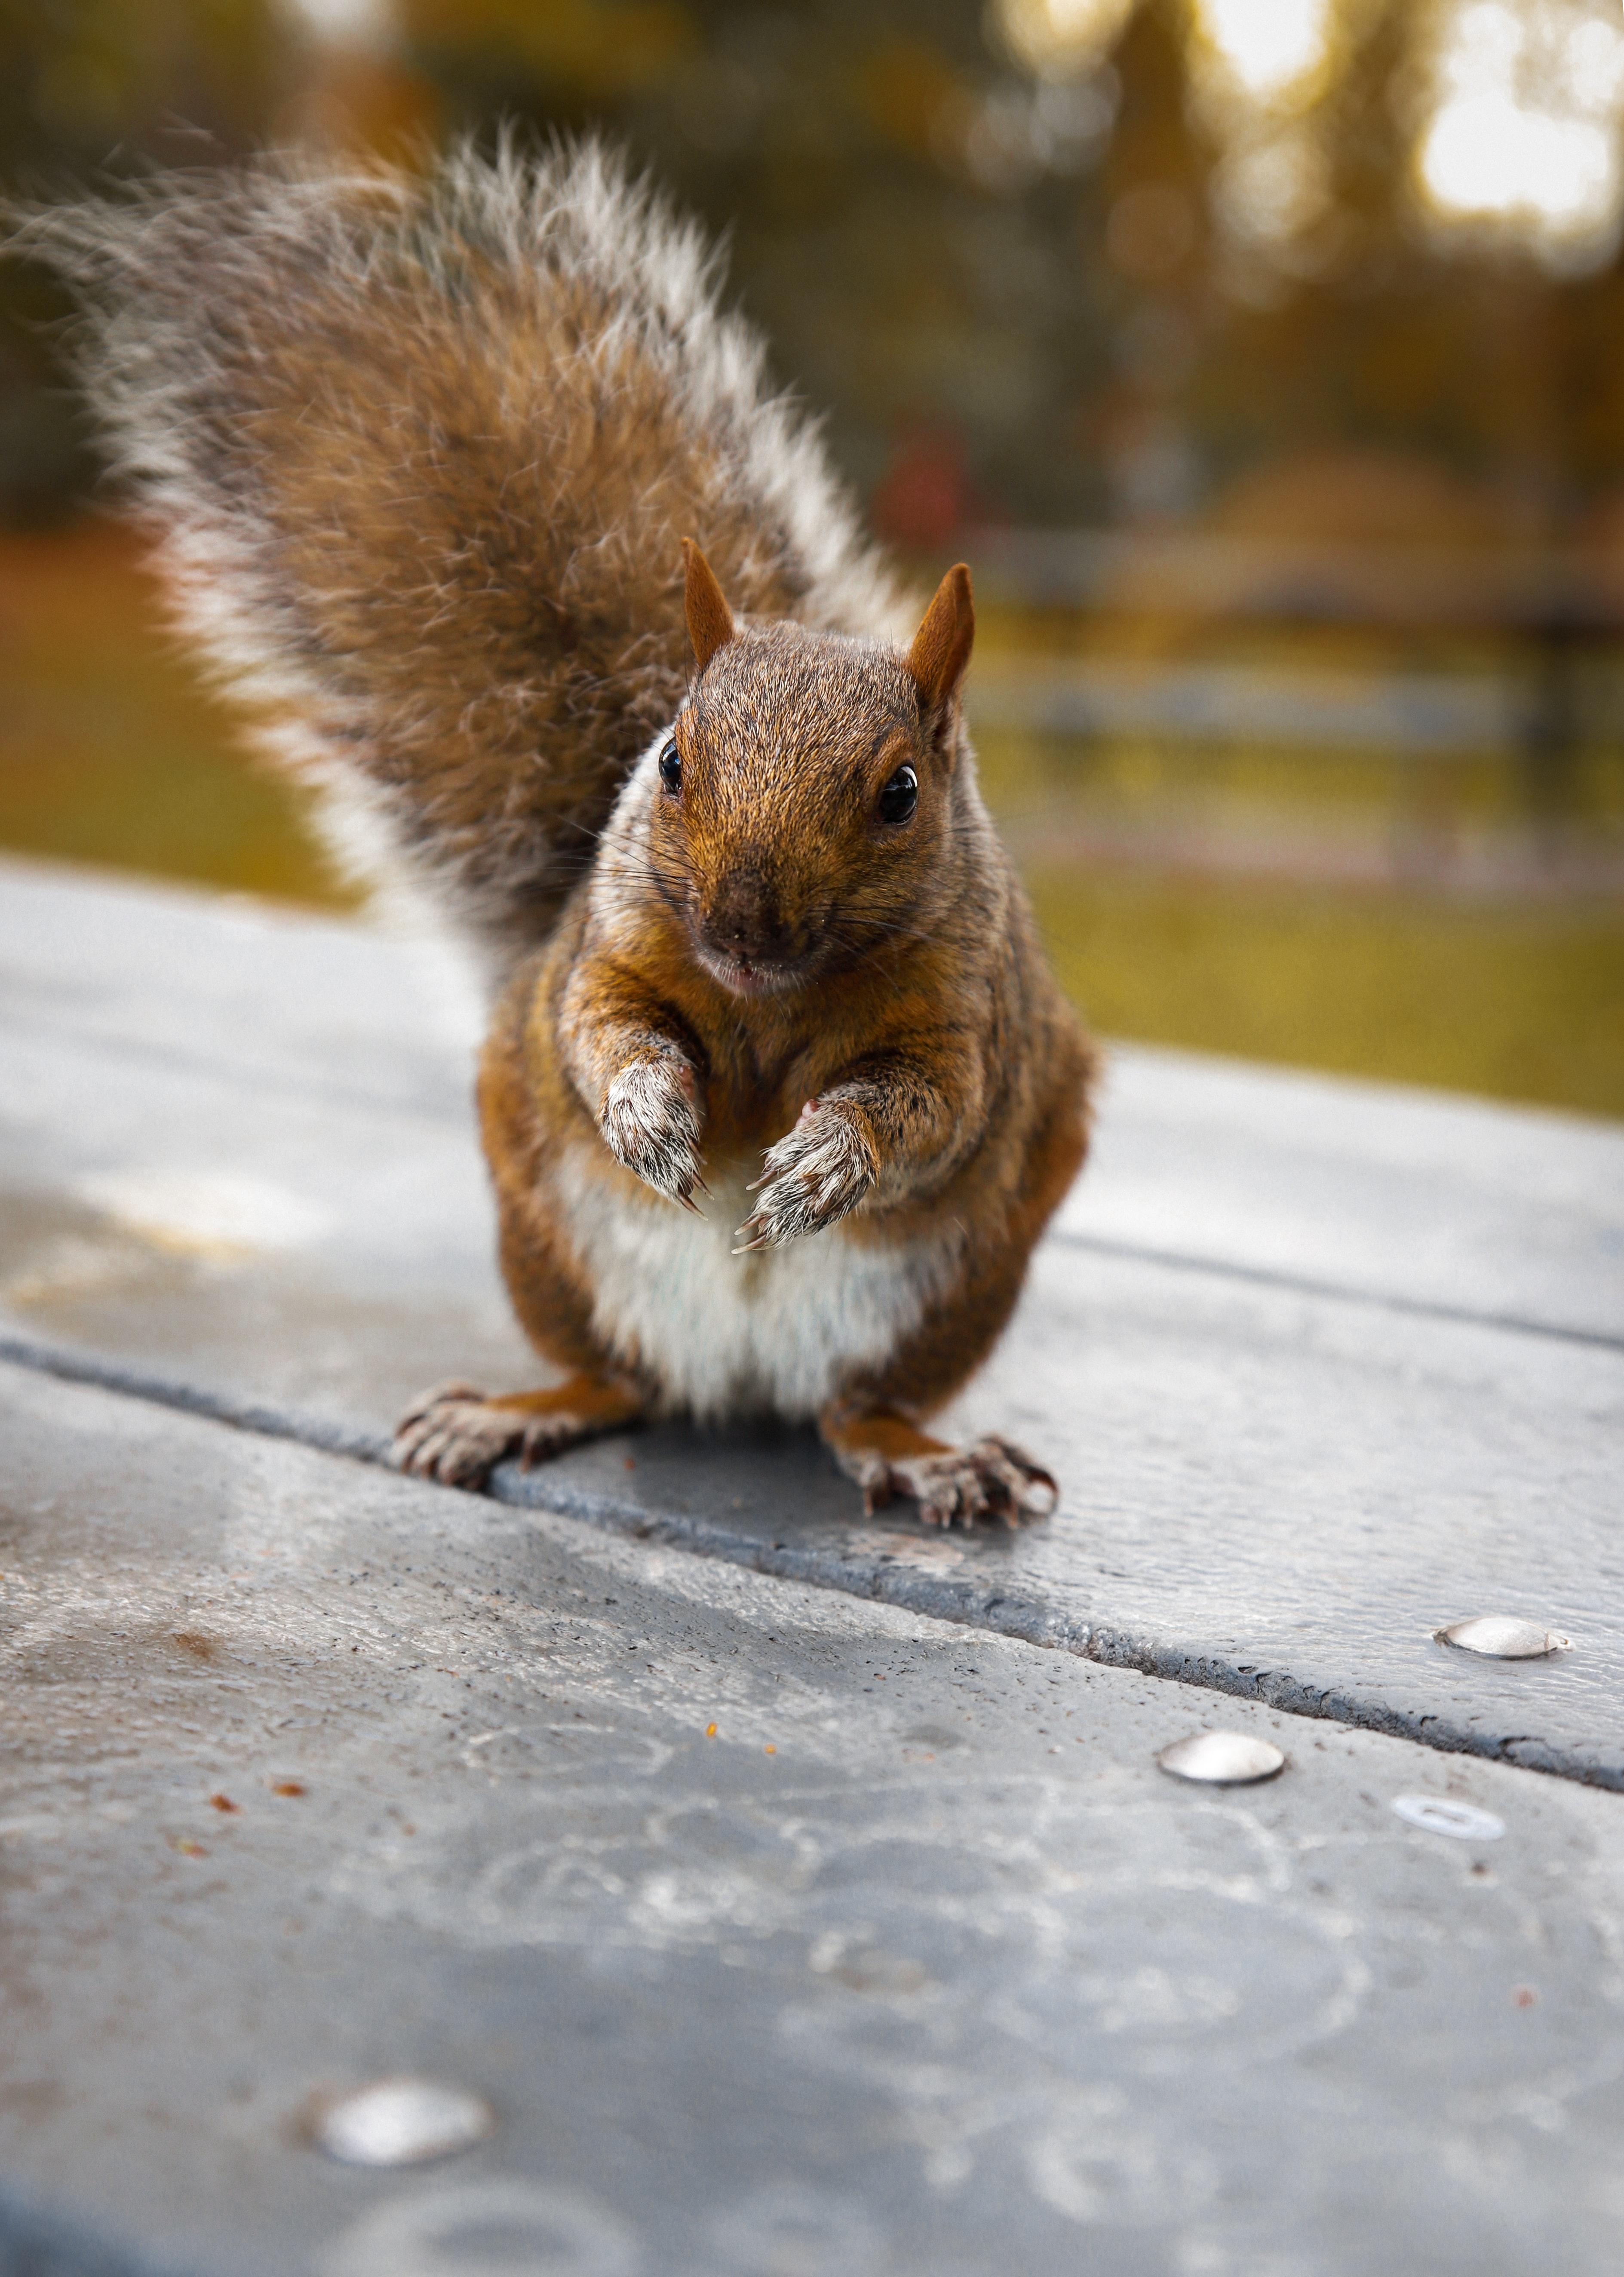 New Lock Screen Wallpapers funny, animals, squirrel, nice, sweetheart, rodent